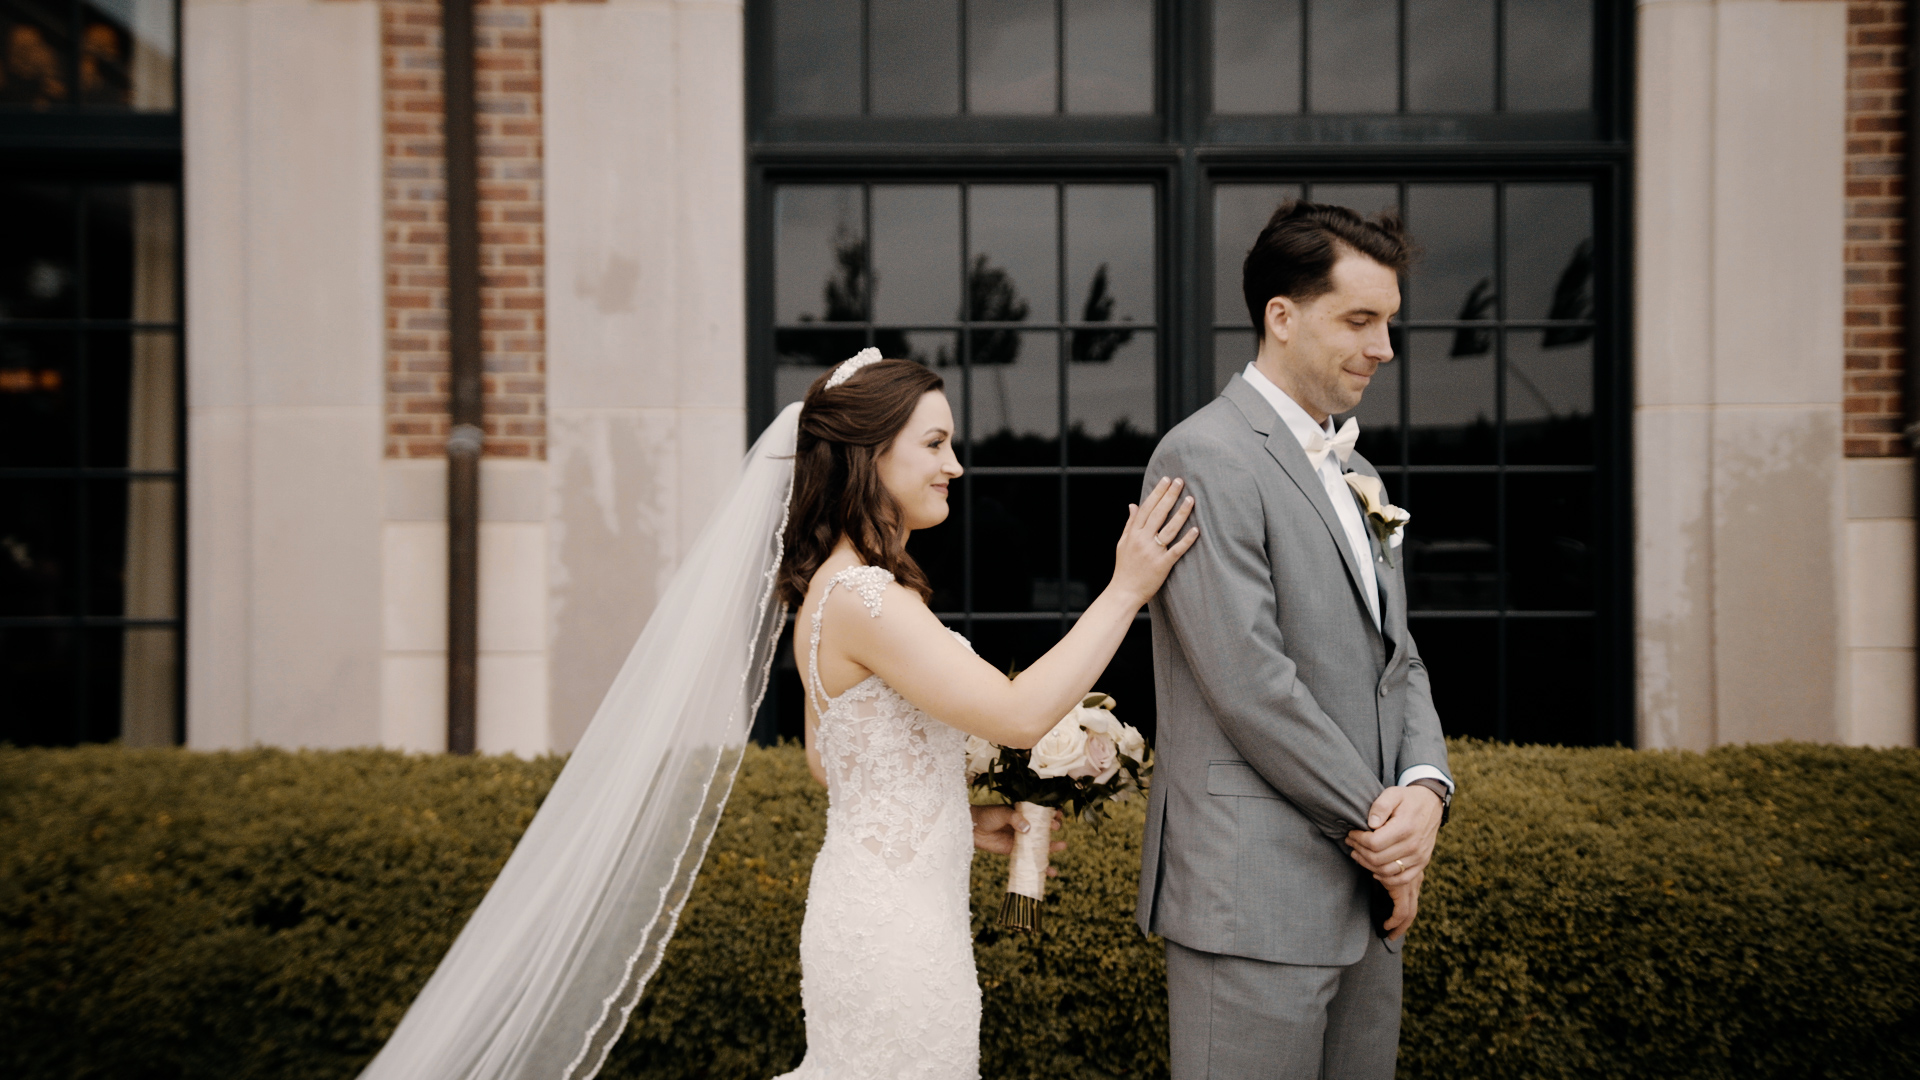 A First Look at a Royal Park Hotel Wedding